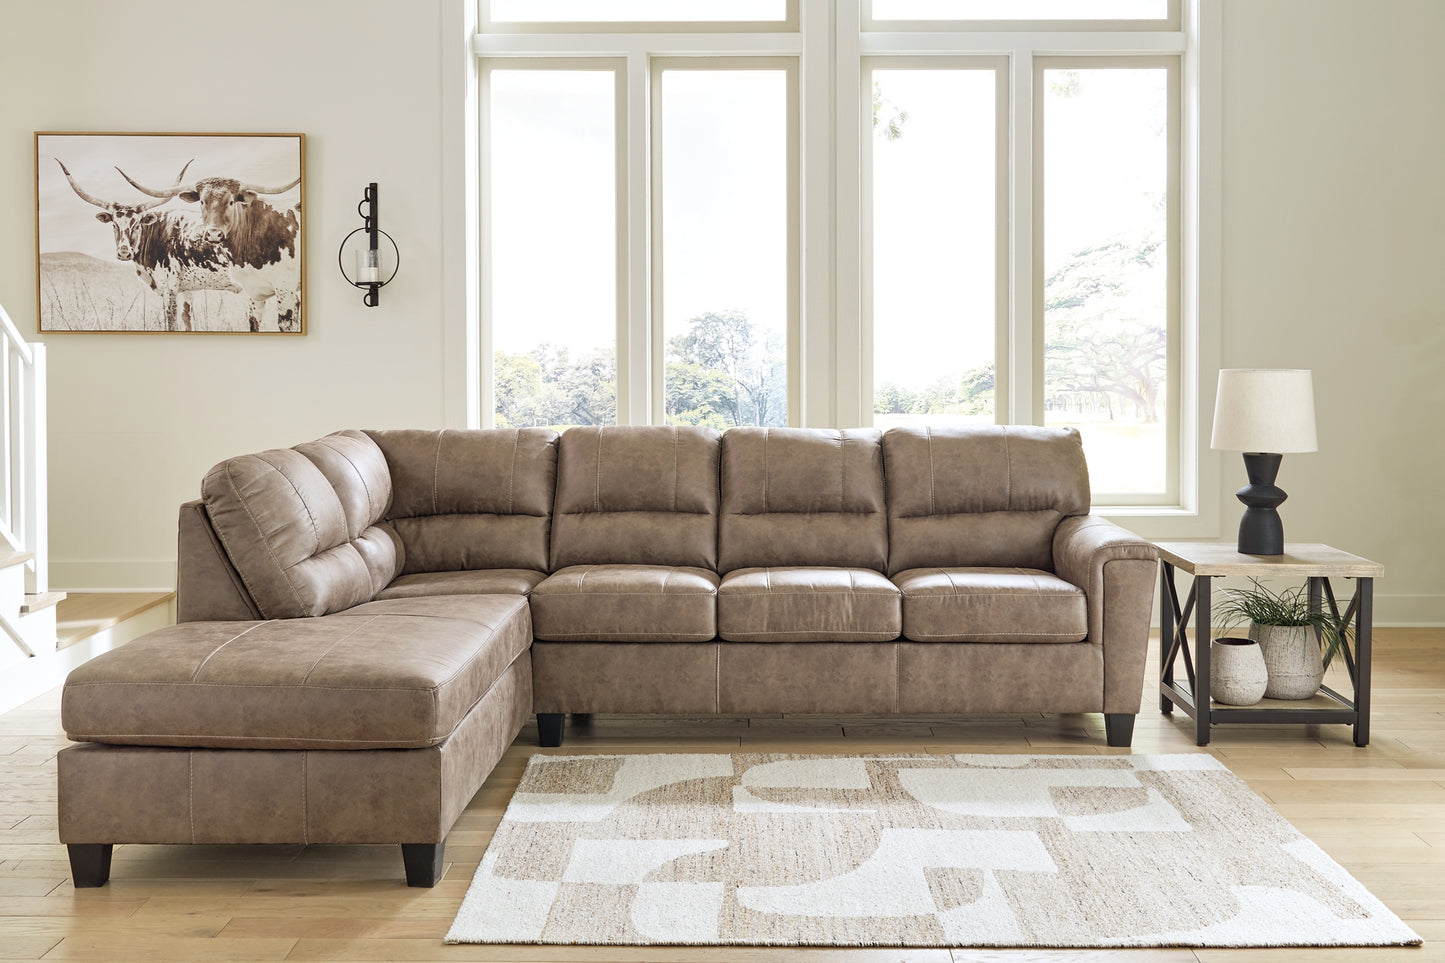 Navi 2-Piece Sectional Sofa Sleeper Chaise Signature Design by Ashley®